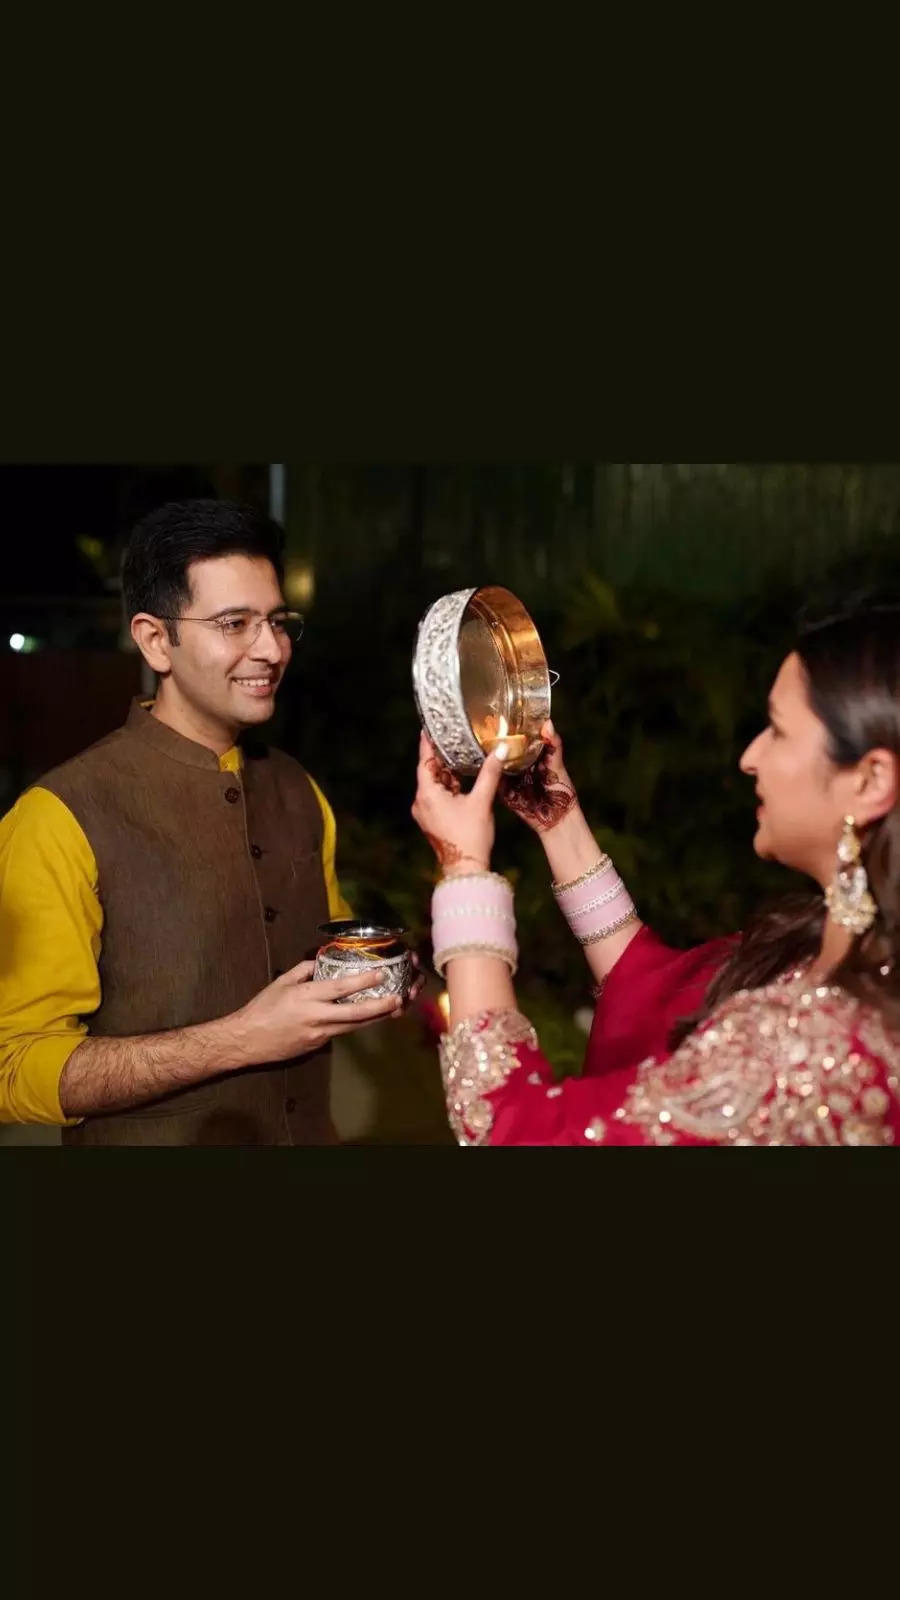 Mumbai men gear up for Karva Chauth, along with their wives | Mumbai News -  Times of India